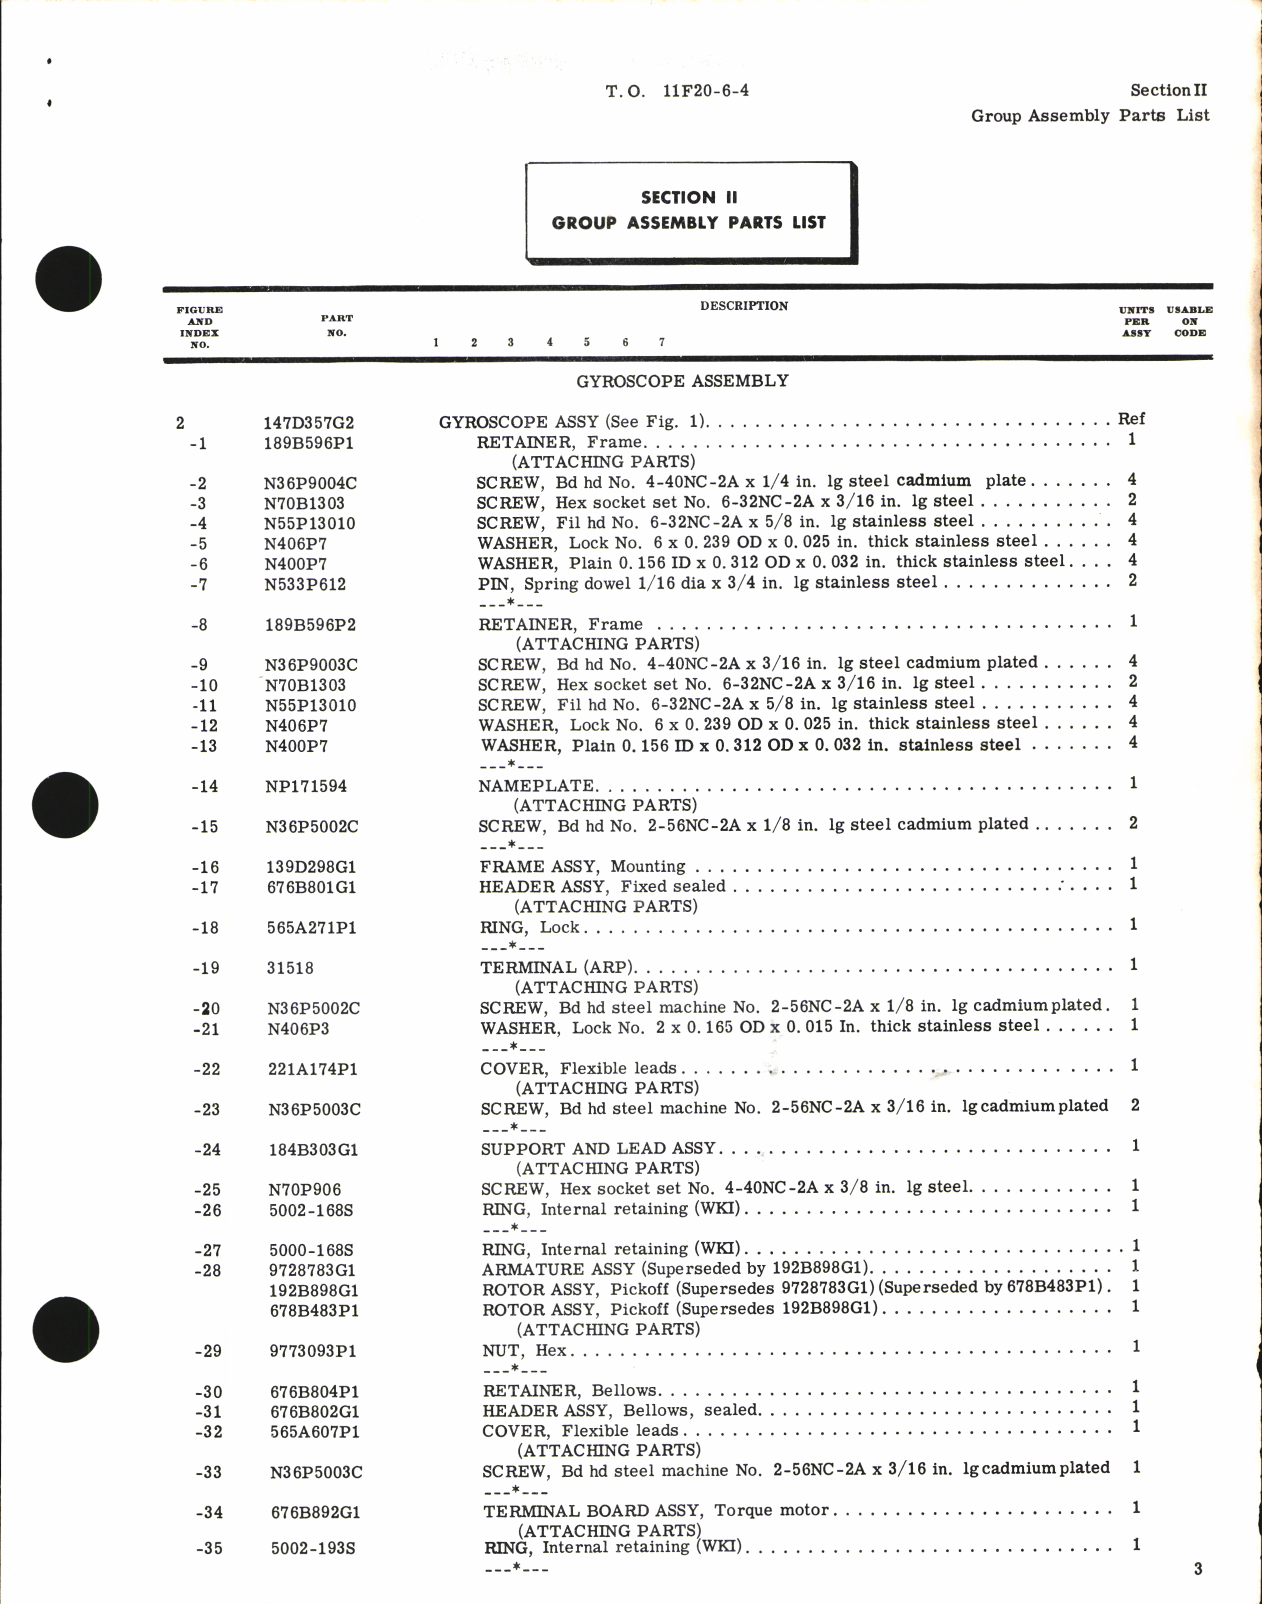 Sample page 5 from AirCorps Library document: Illustrated Parts Breakdown for Gyroscope Type KR-5C2, Part No. 147D357G2